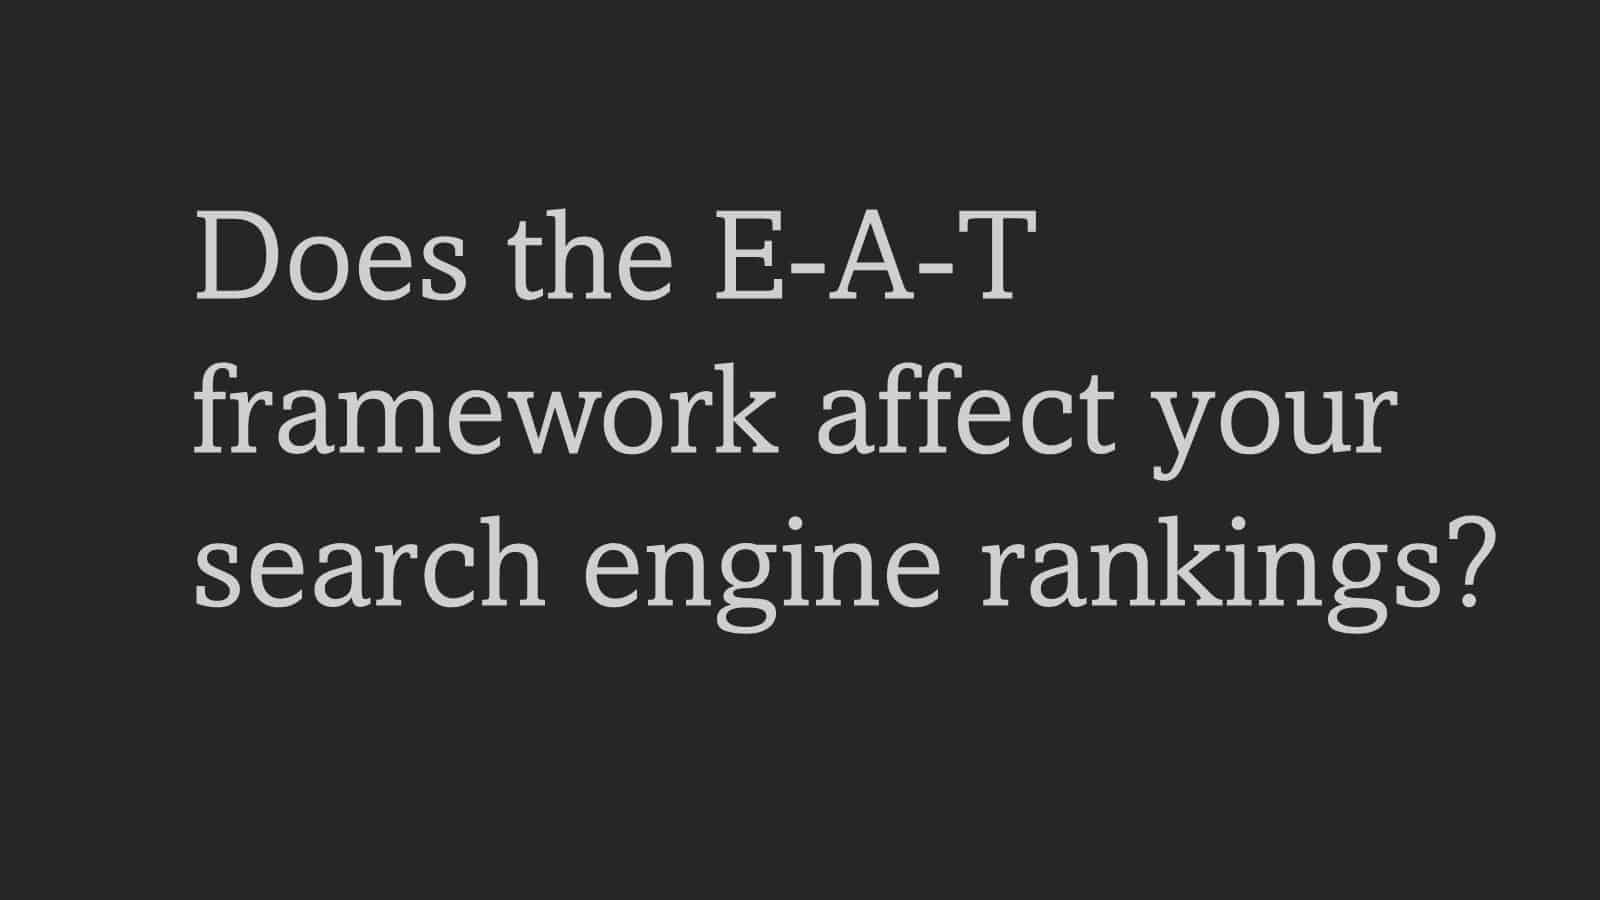 Does the E-A-T framework affect your search engine rankings